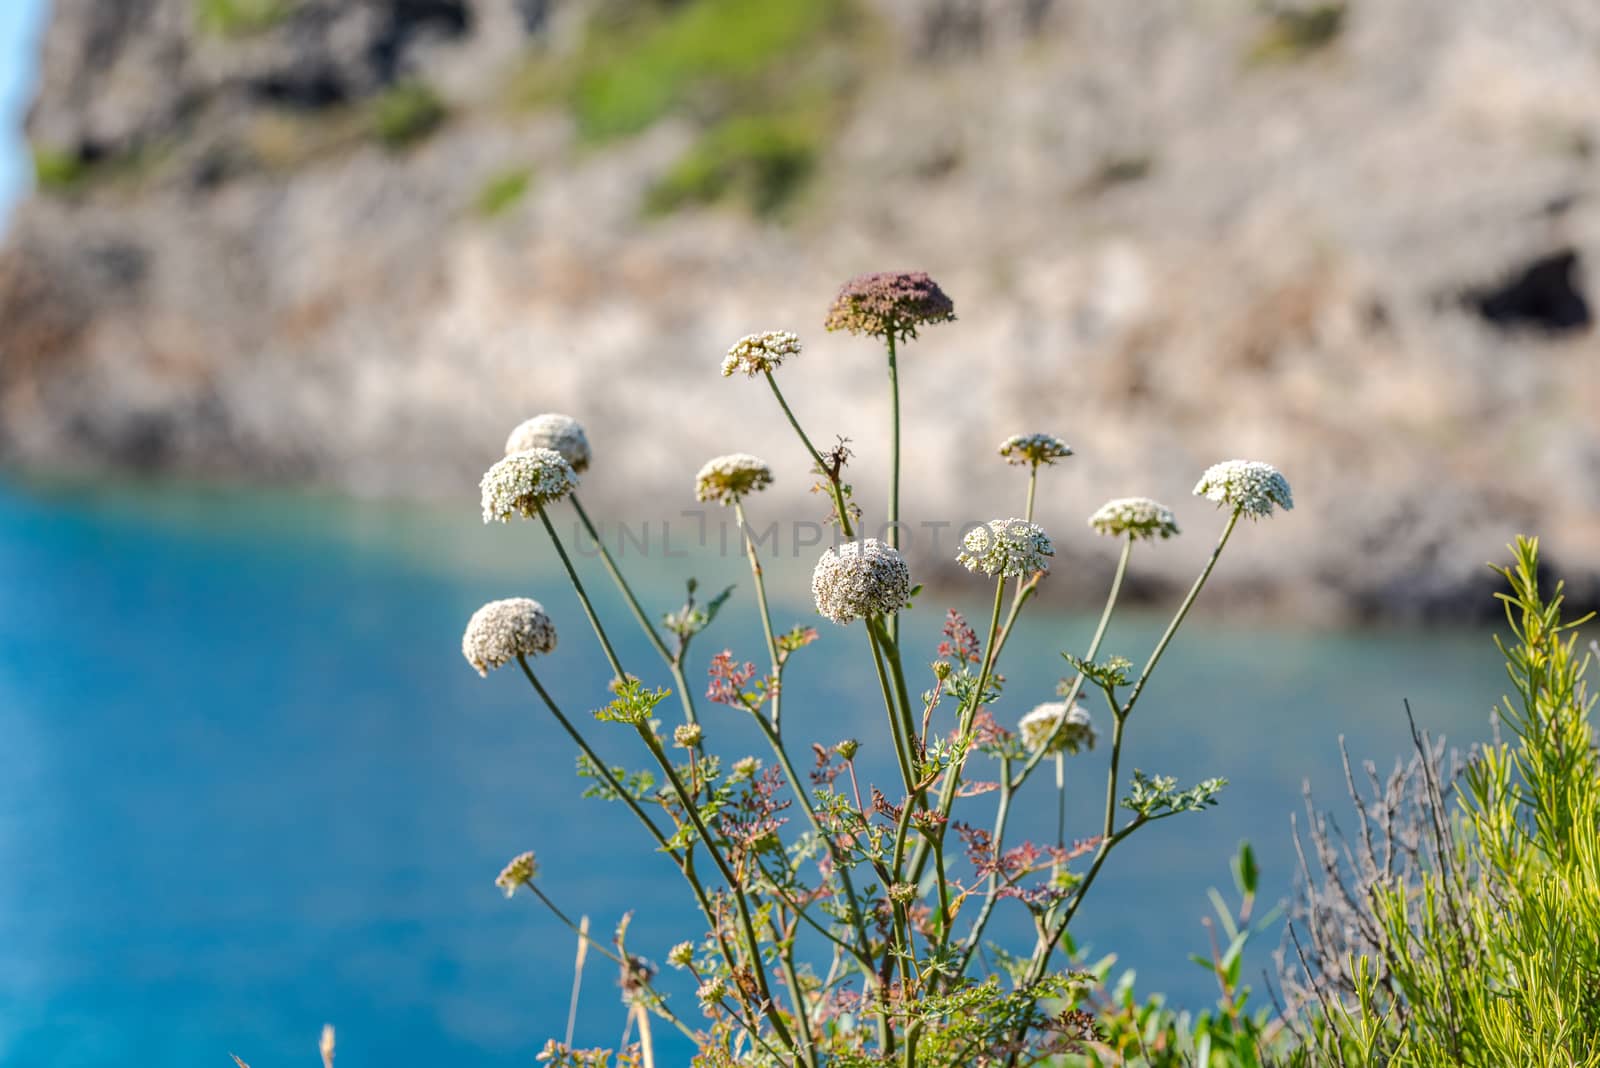 Parc Natural Cap de Creus, Spain :  8 july 2020 : Flowers Cap de Creus, natural park. Eastern point of Spain, Girona province, Catalonia. Famous tourist destination in Costa Brava. Sunny summer day with blue sky and clouds